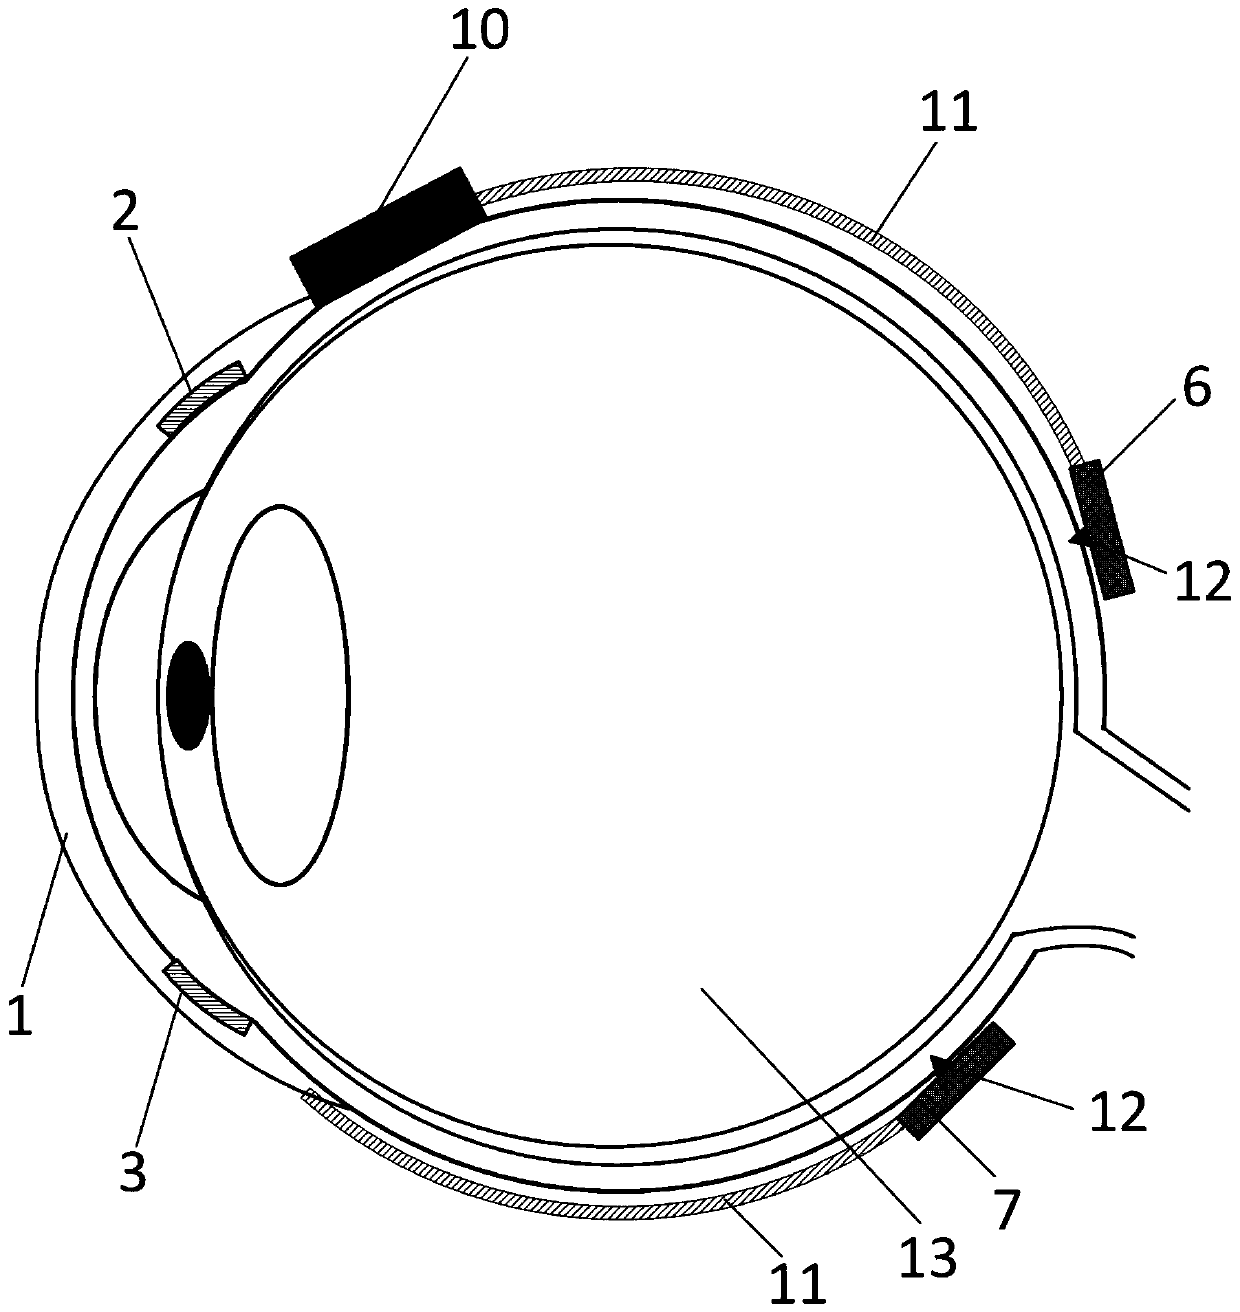 Extraocular electrode array equipment for local electric stimulation of retina